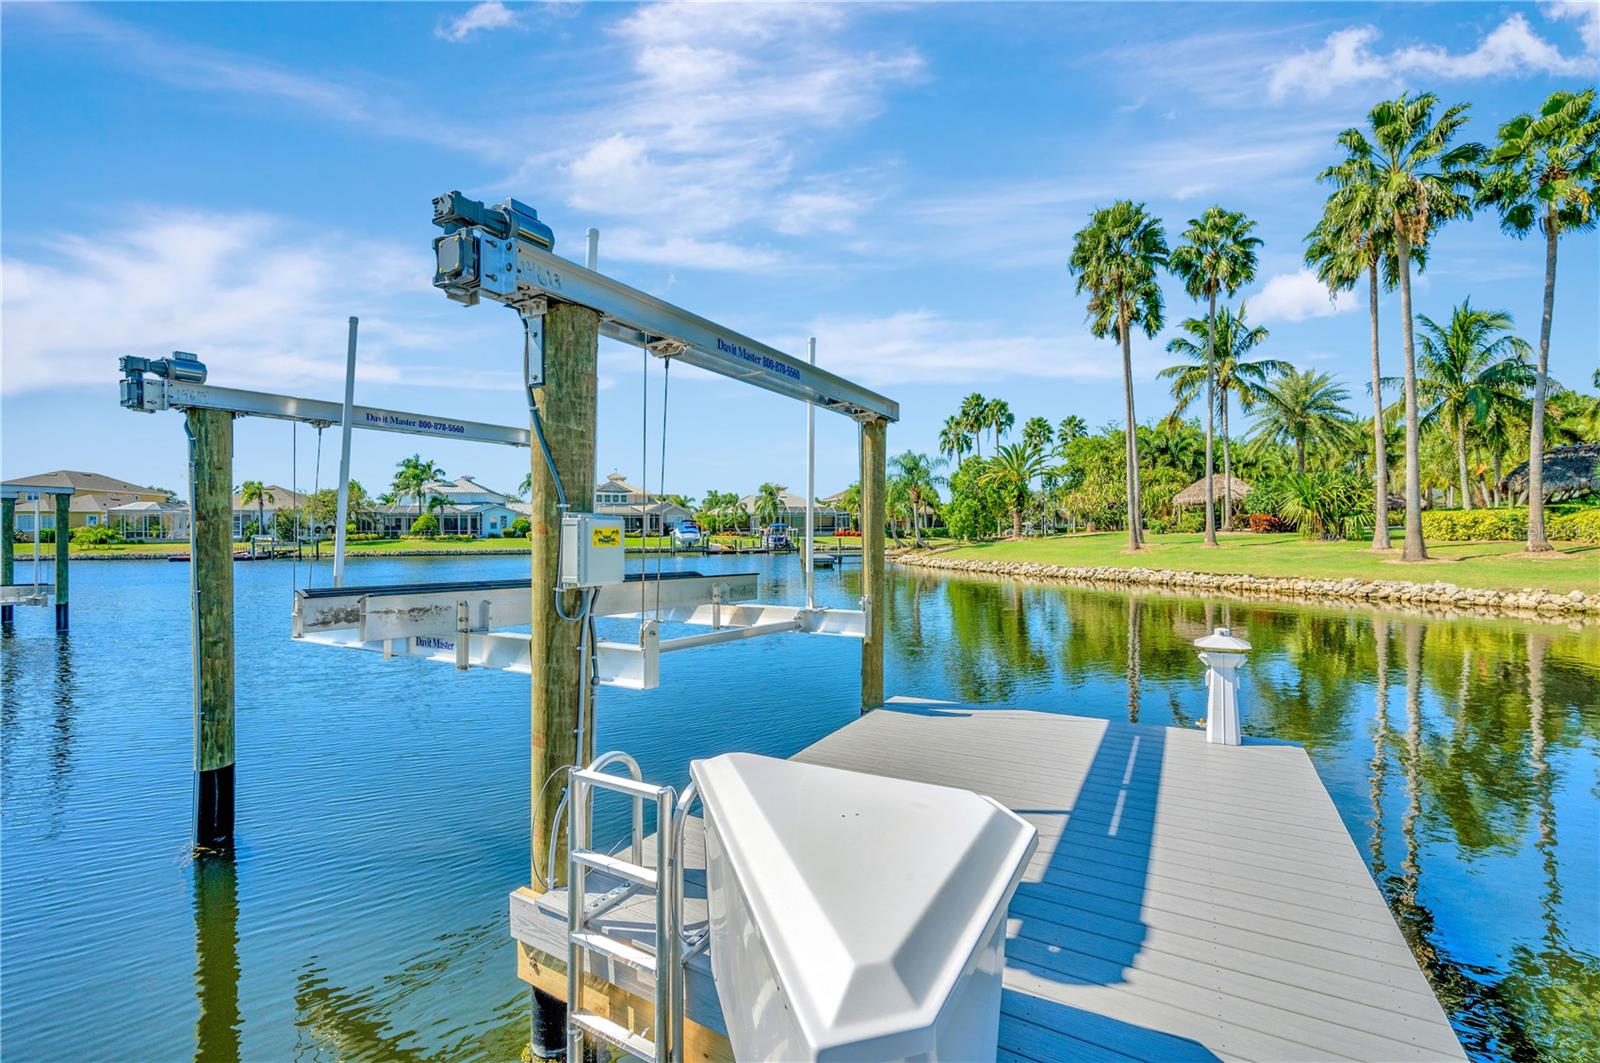 Your Private Dock and Boat Lift.